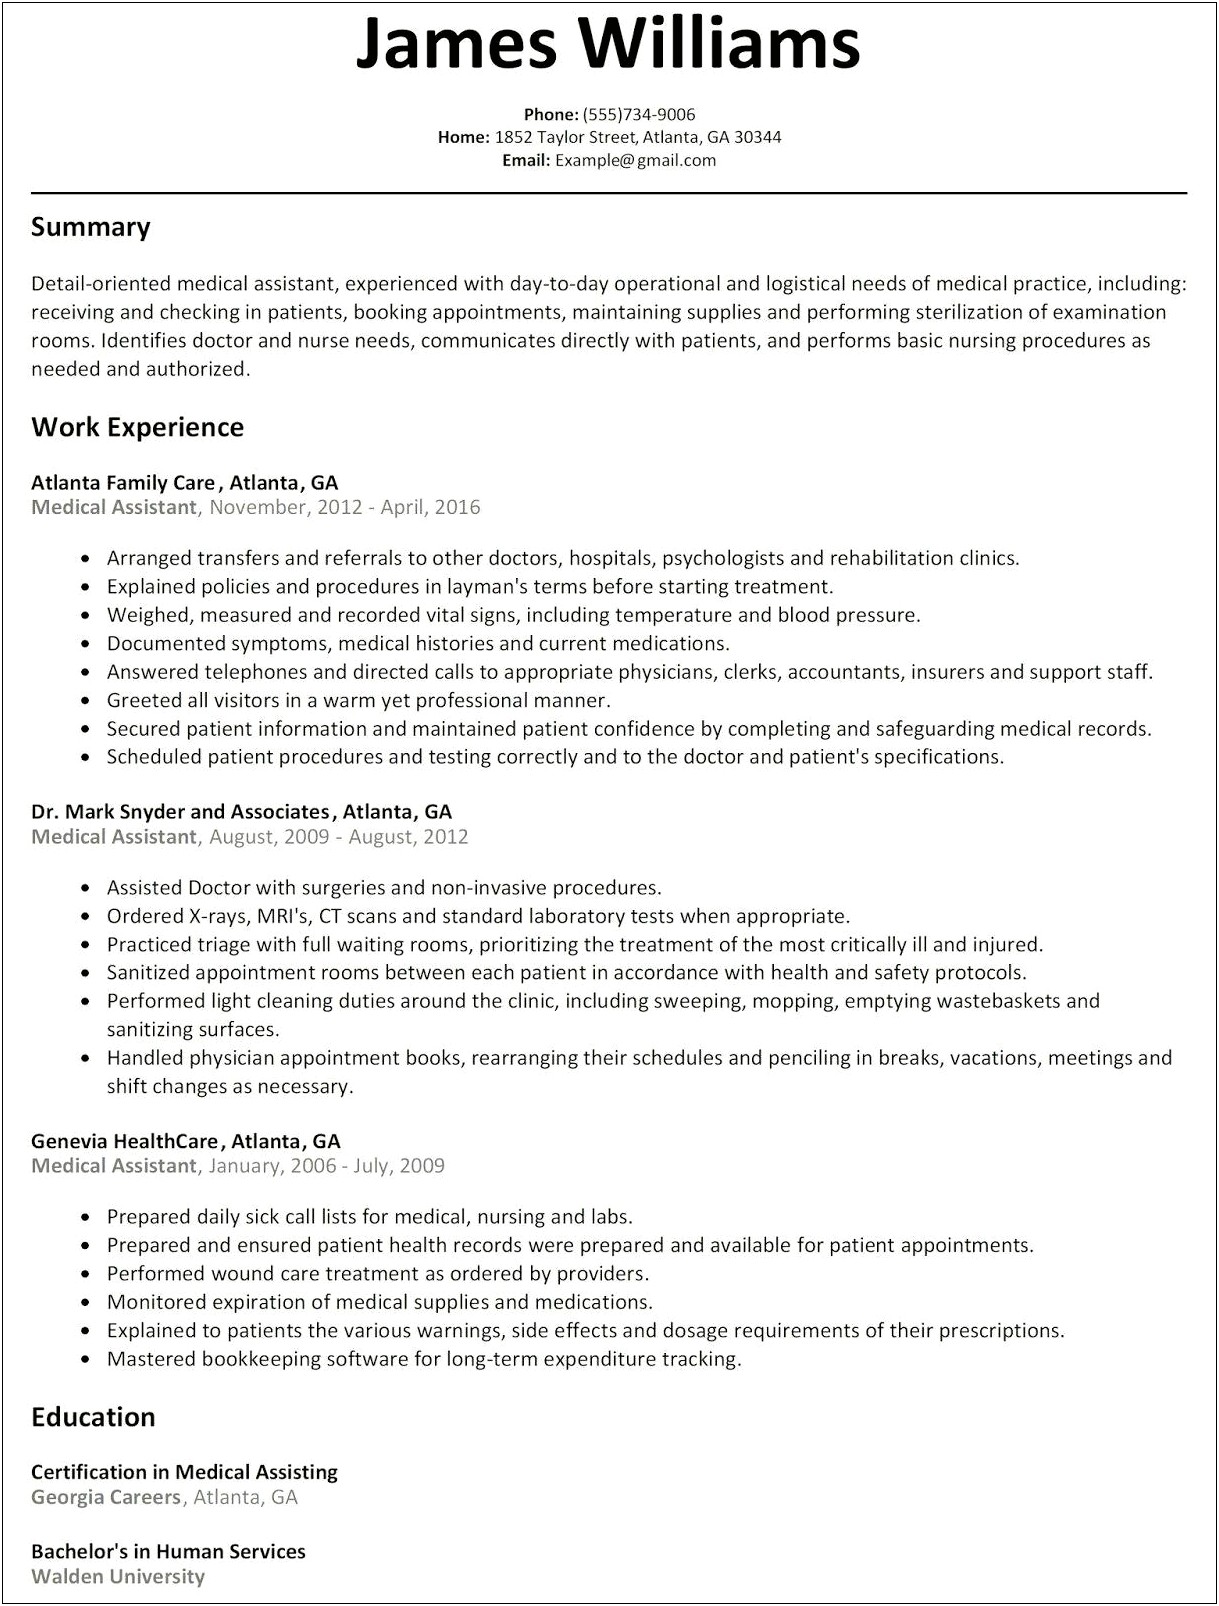 Teaching Assistant Resume 2019 Examples